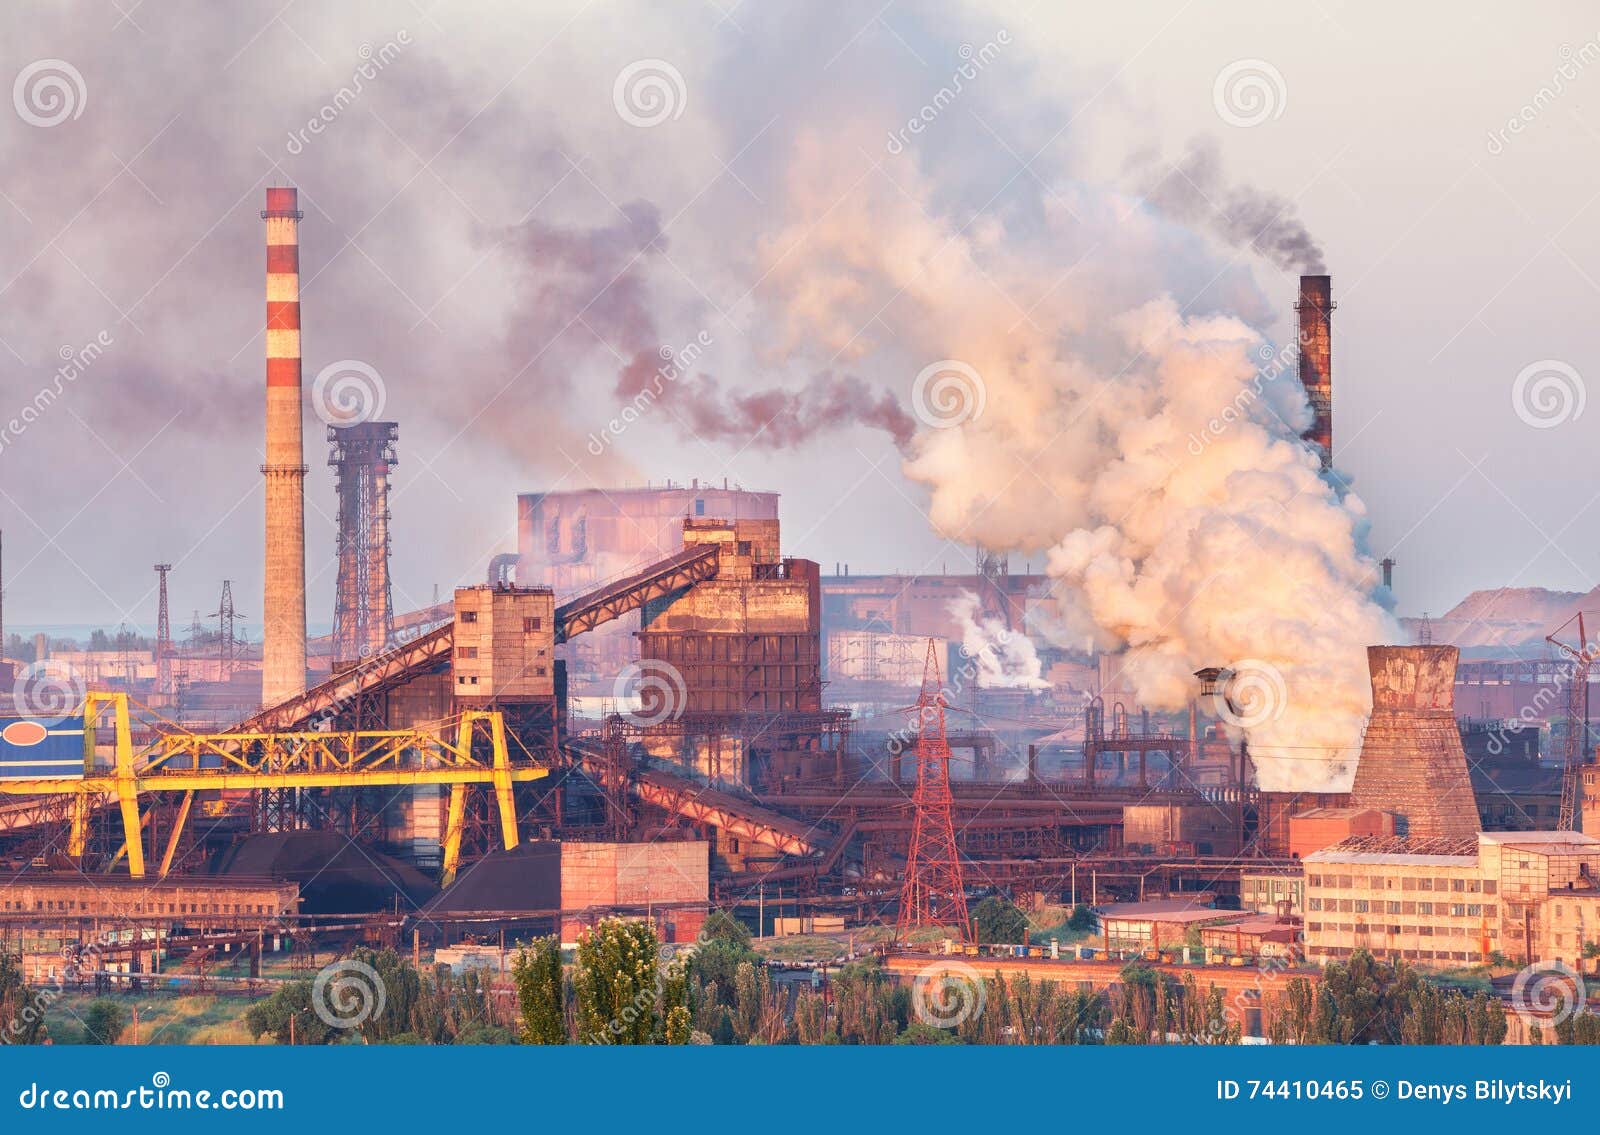 industrial landscape in ukraine. steel factory at sunset. pipes with smoke. metallurgical plant. steelworks, iron works